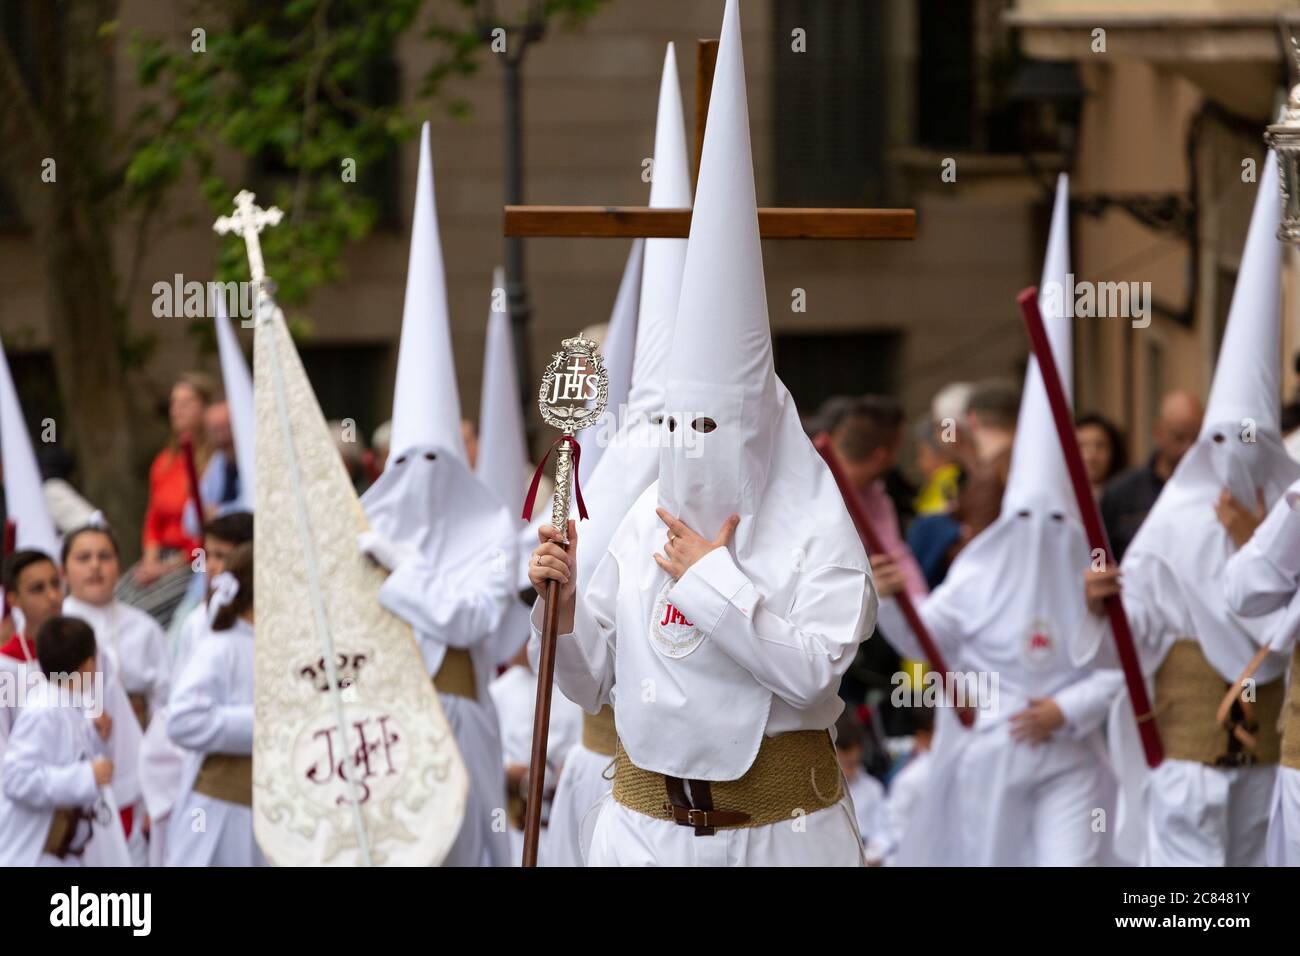 People dressed in religious white hoods of penance during the Easter parade in Palma, Mallorca Stock Photo